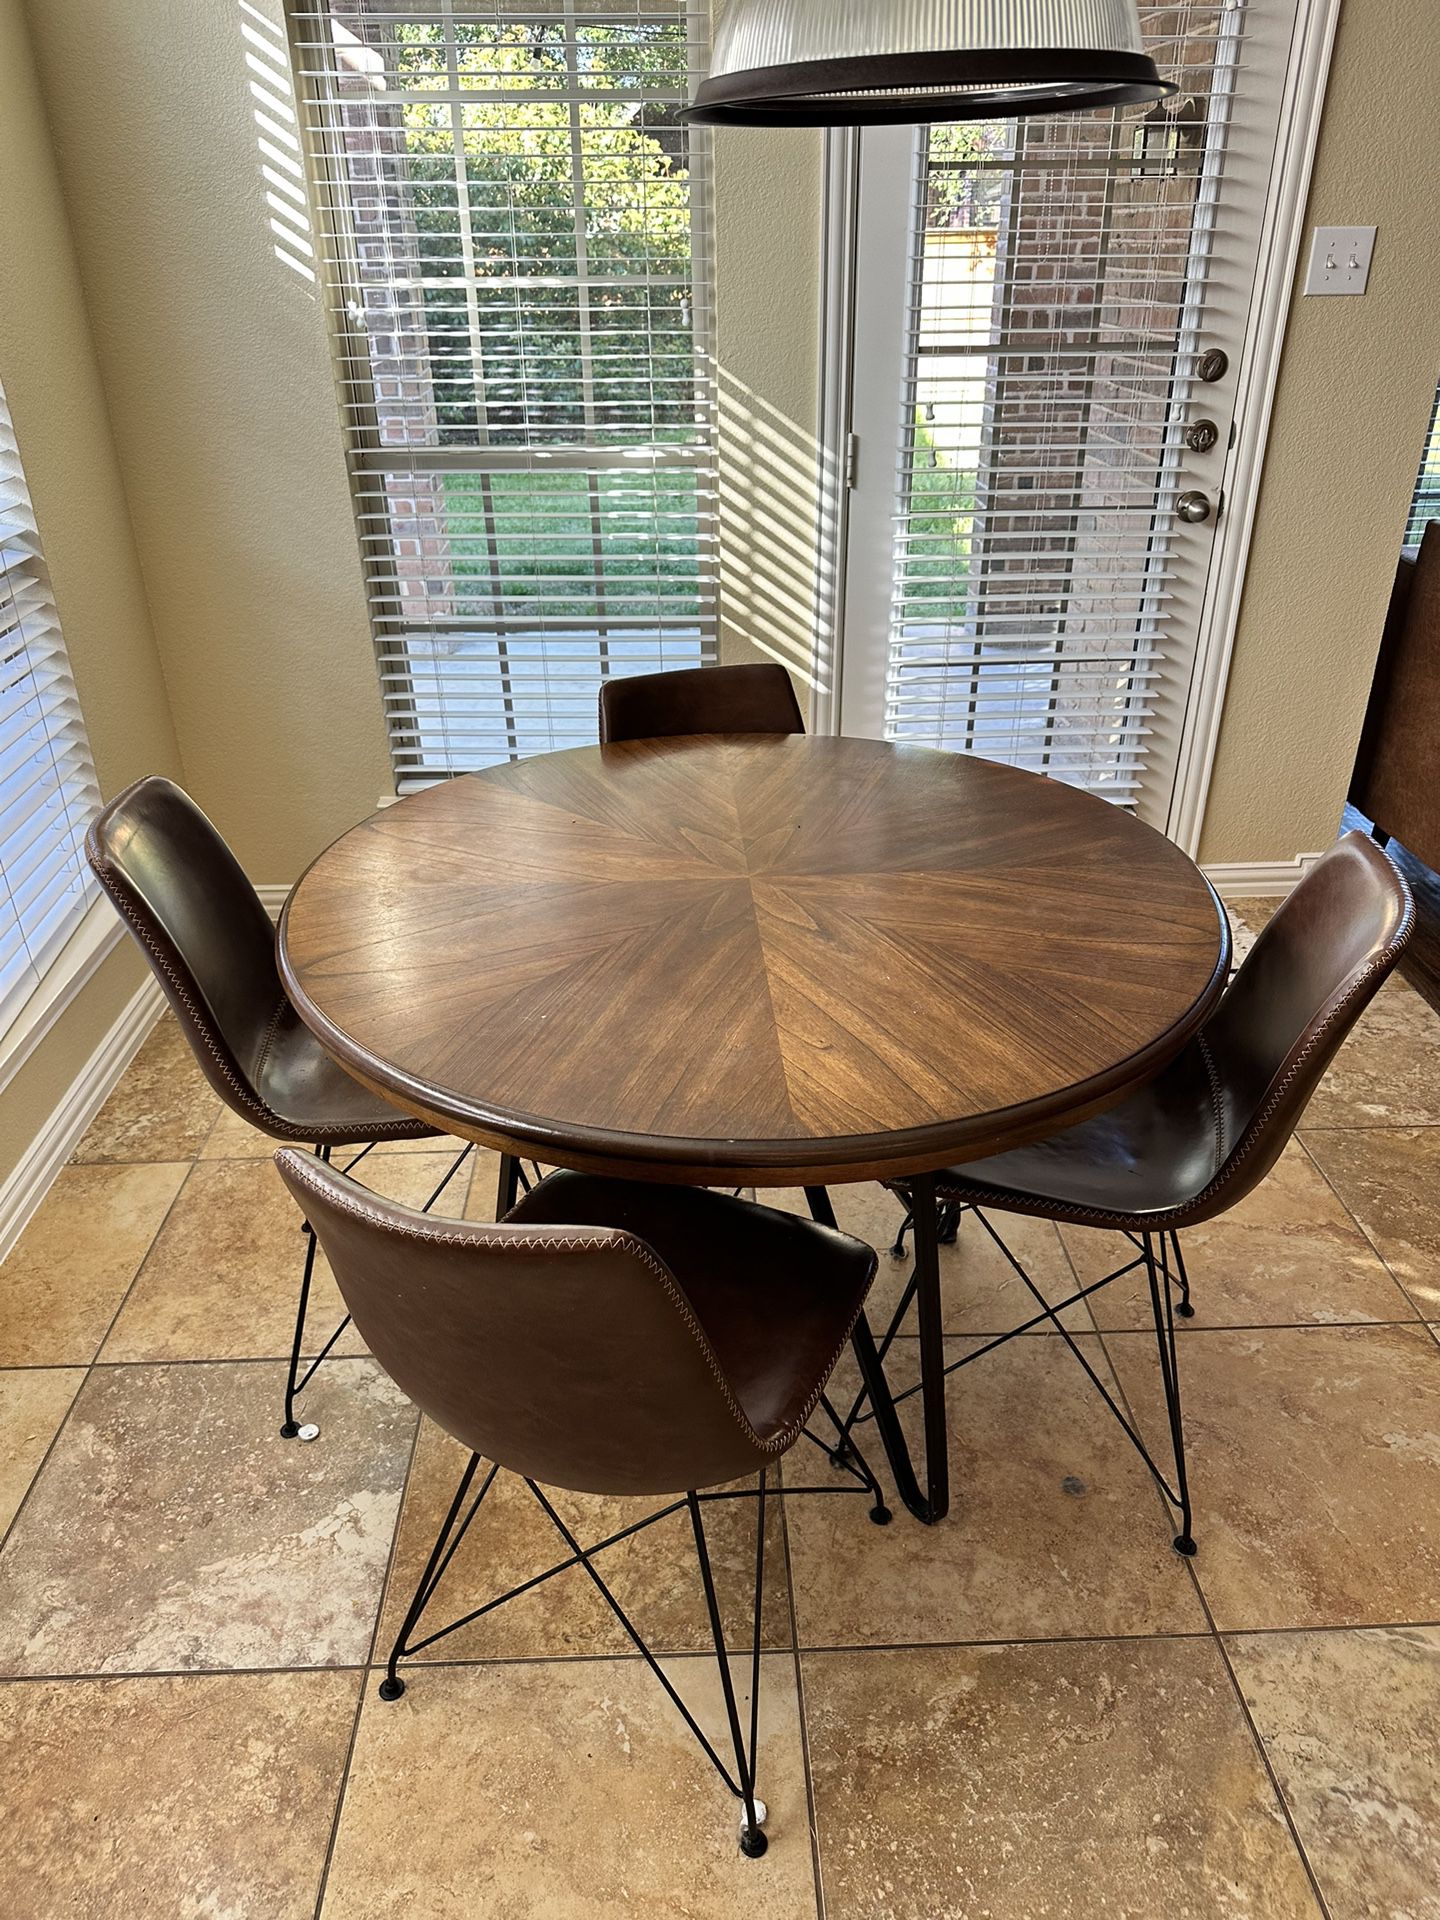 Kitchen Table W/chairs